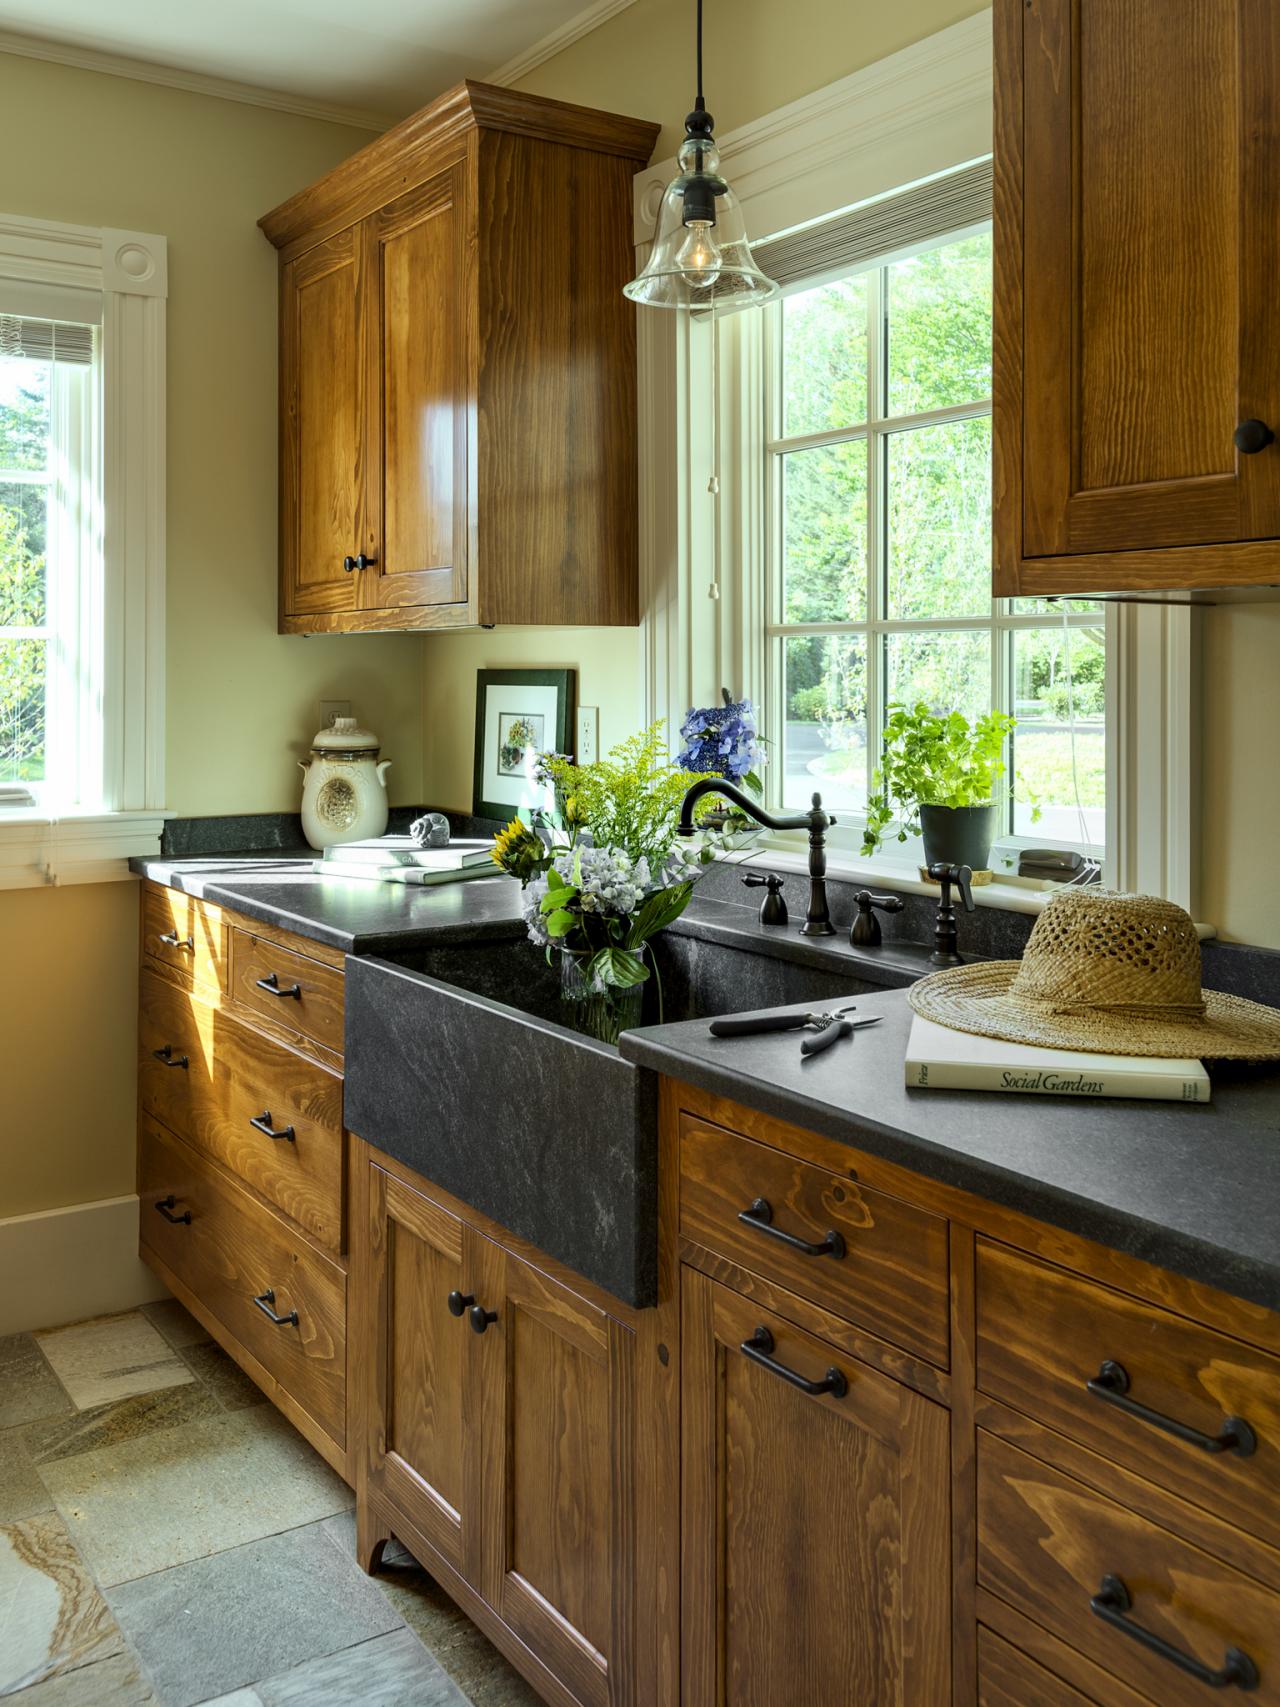 Building Kitchen Cabinets Pictures Ideas Tips From HGTV HGTV